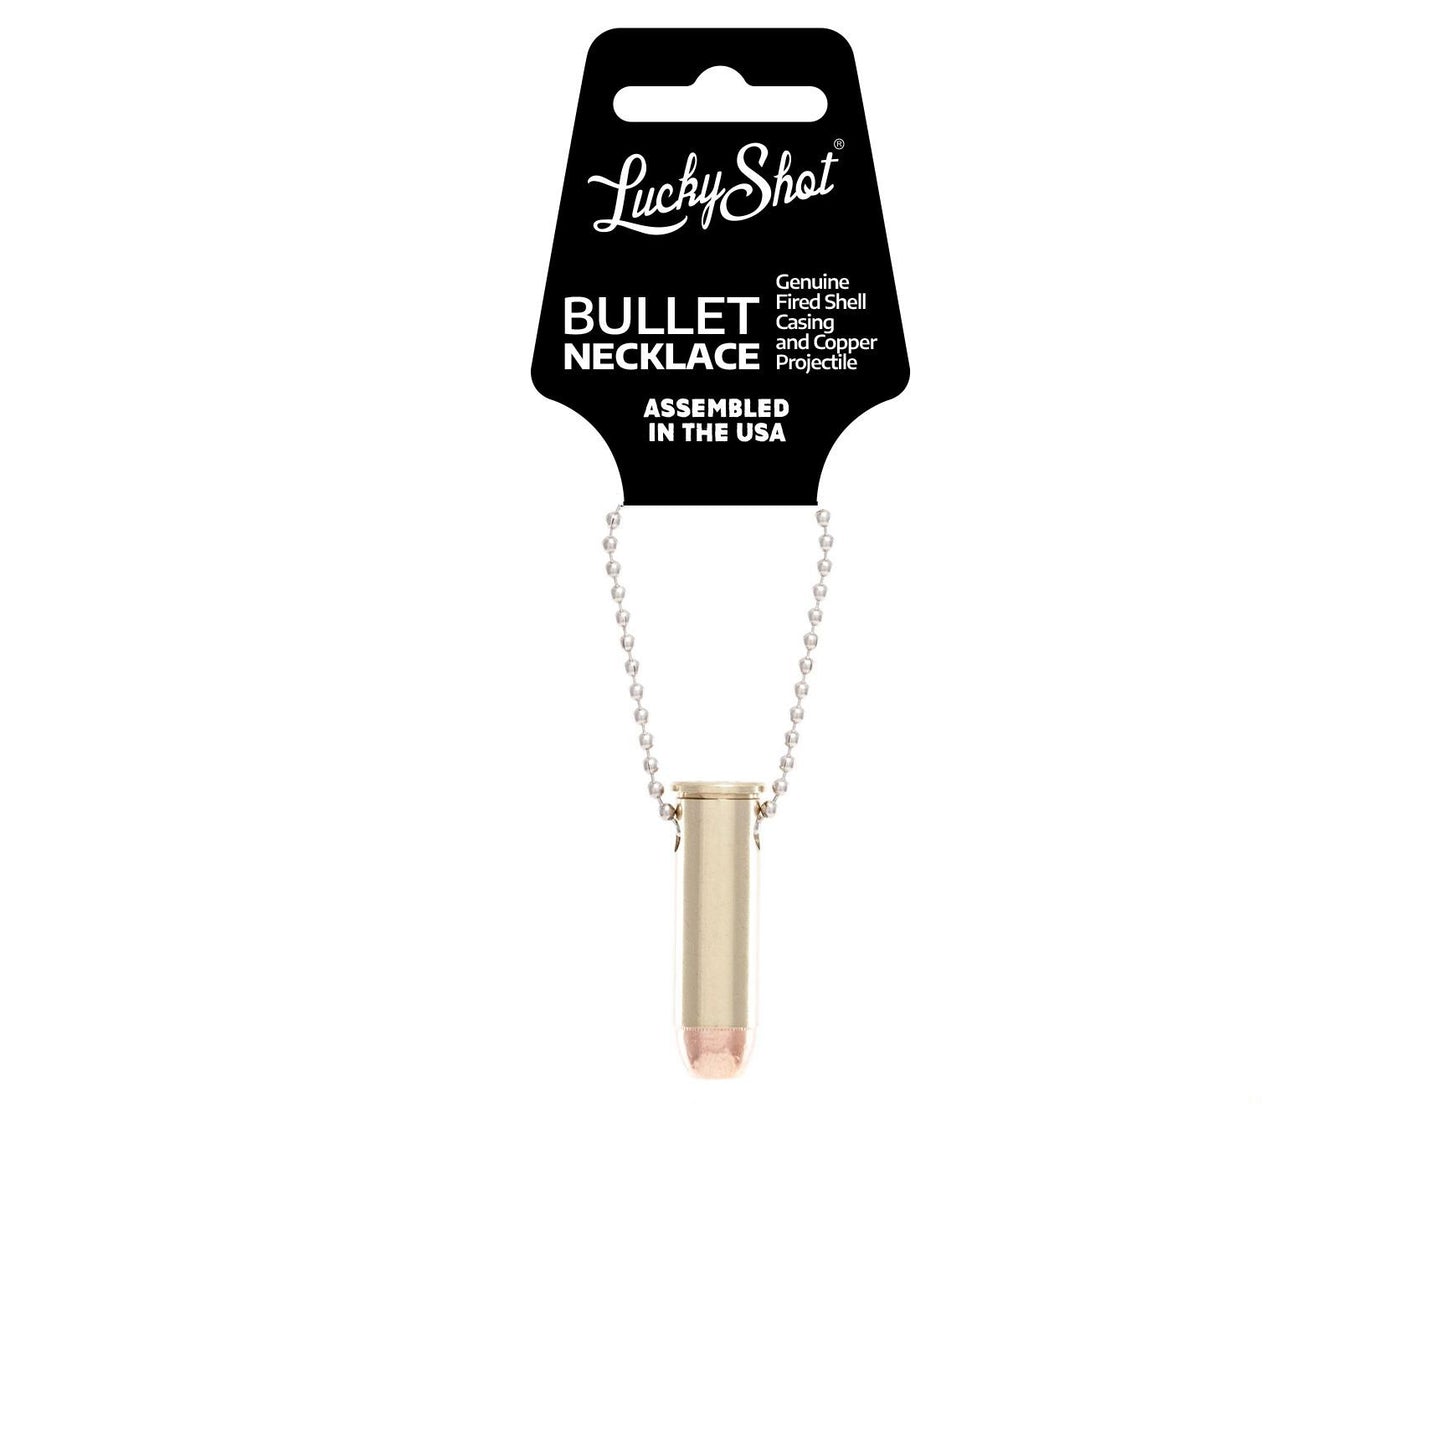 Lucky Shot Bullet Necklace .44 Mag Ball Chain Necklace